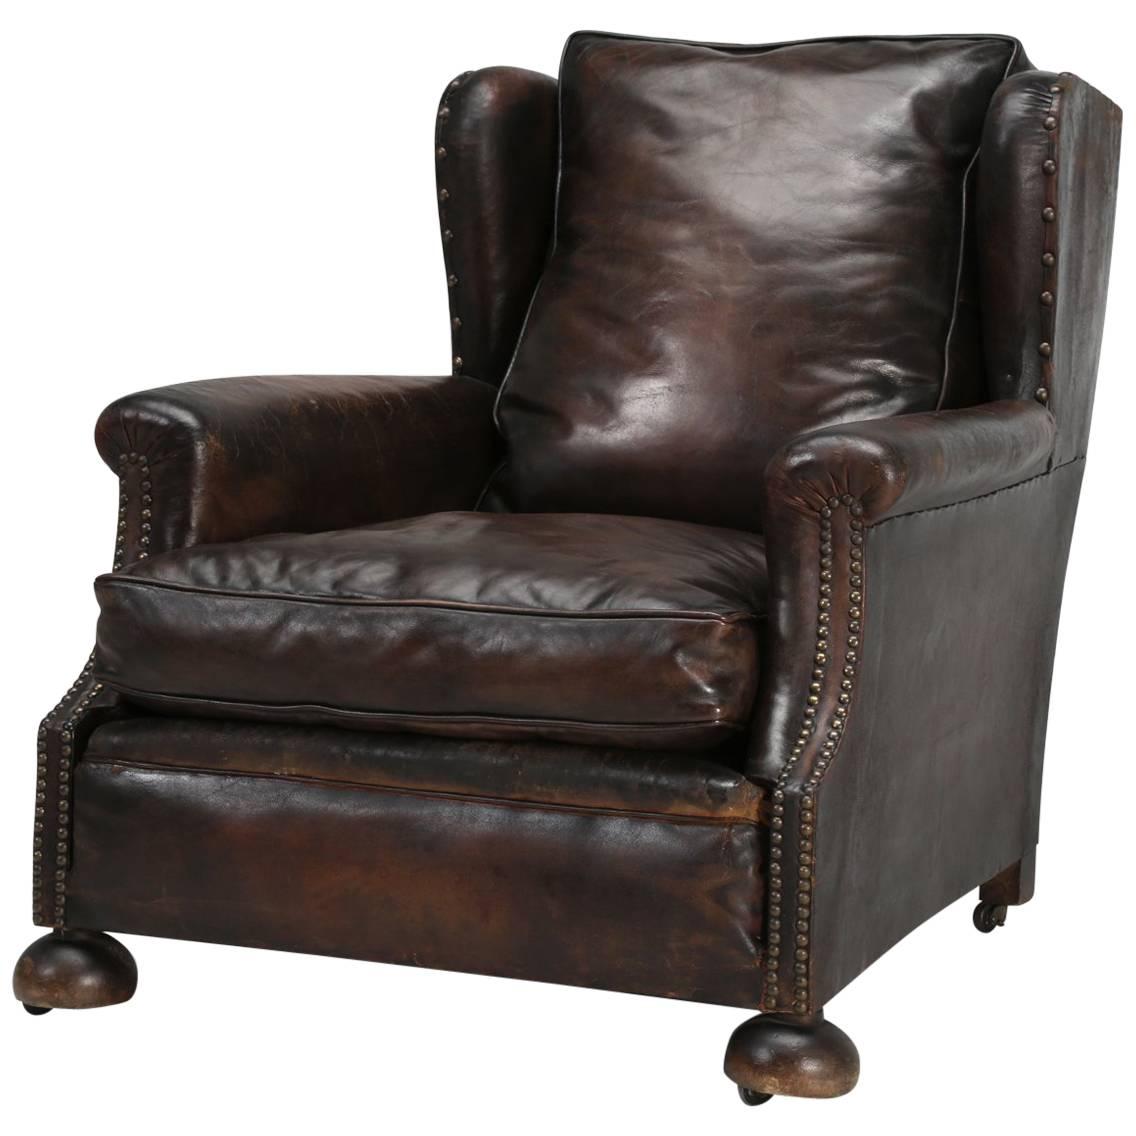 French Leather Club Chair Designed for Taller Men or Woman